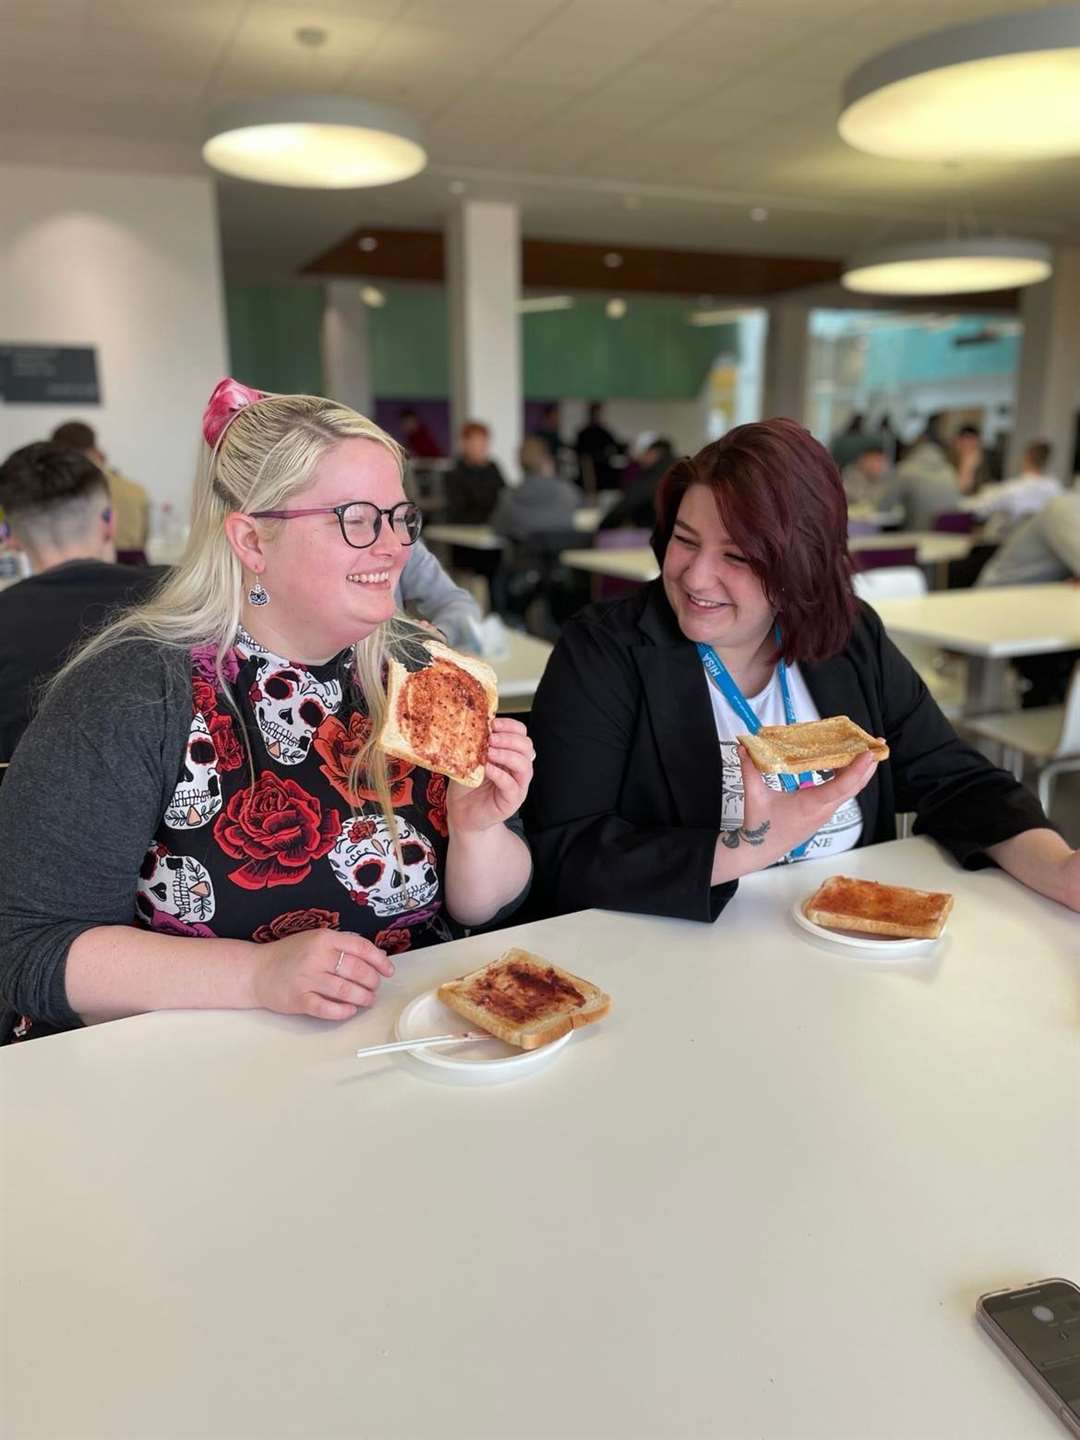 Heather Innes, Highlands and Islands Students’ Association (HISA) regional vice president higher education, and Sophie MacGregor, HISA Inverness assistant, at the breakfast club.